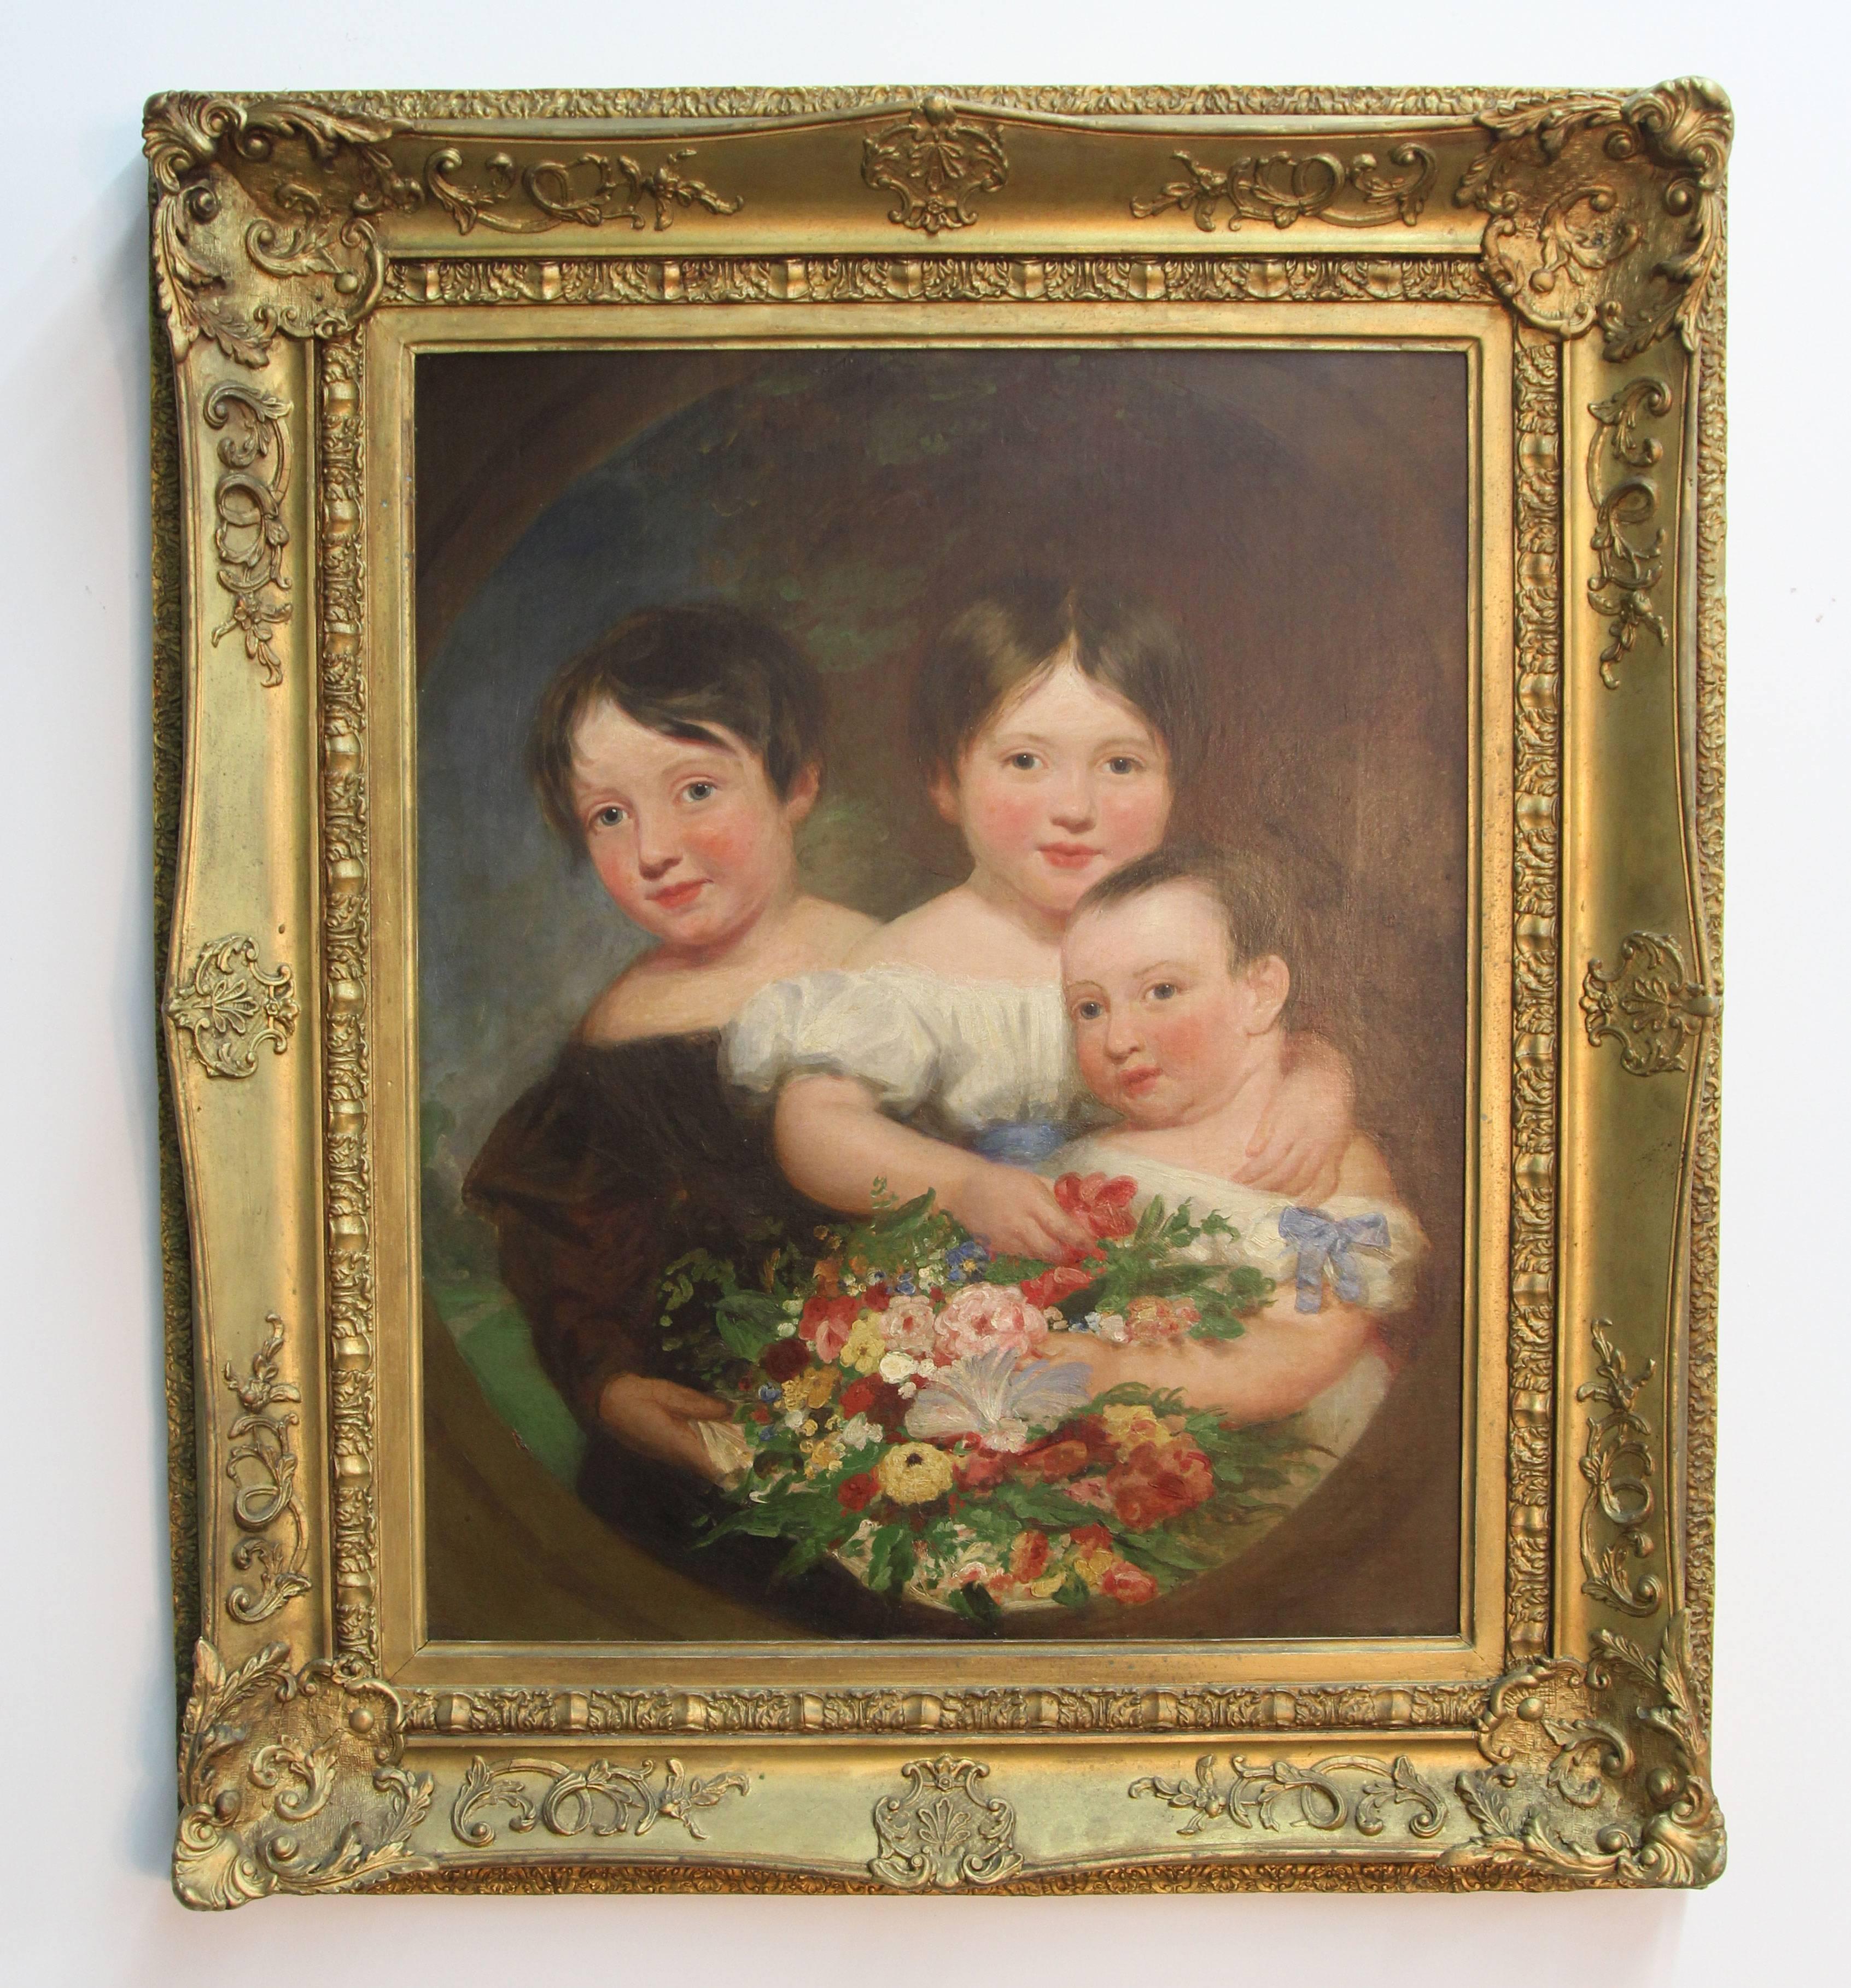 A portrait of children and baby holding a bouquet of flowers. Antique giltwood frame.